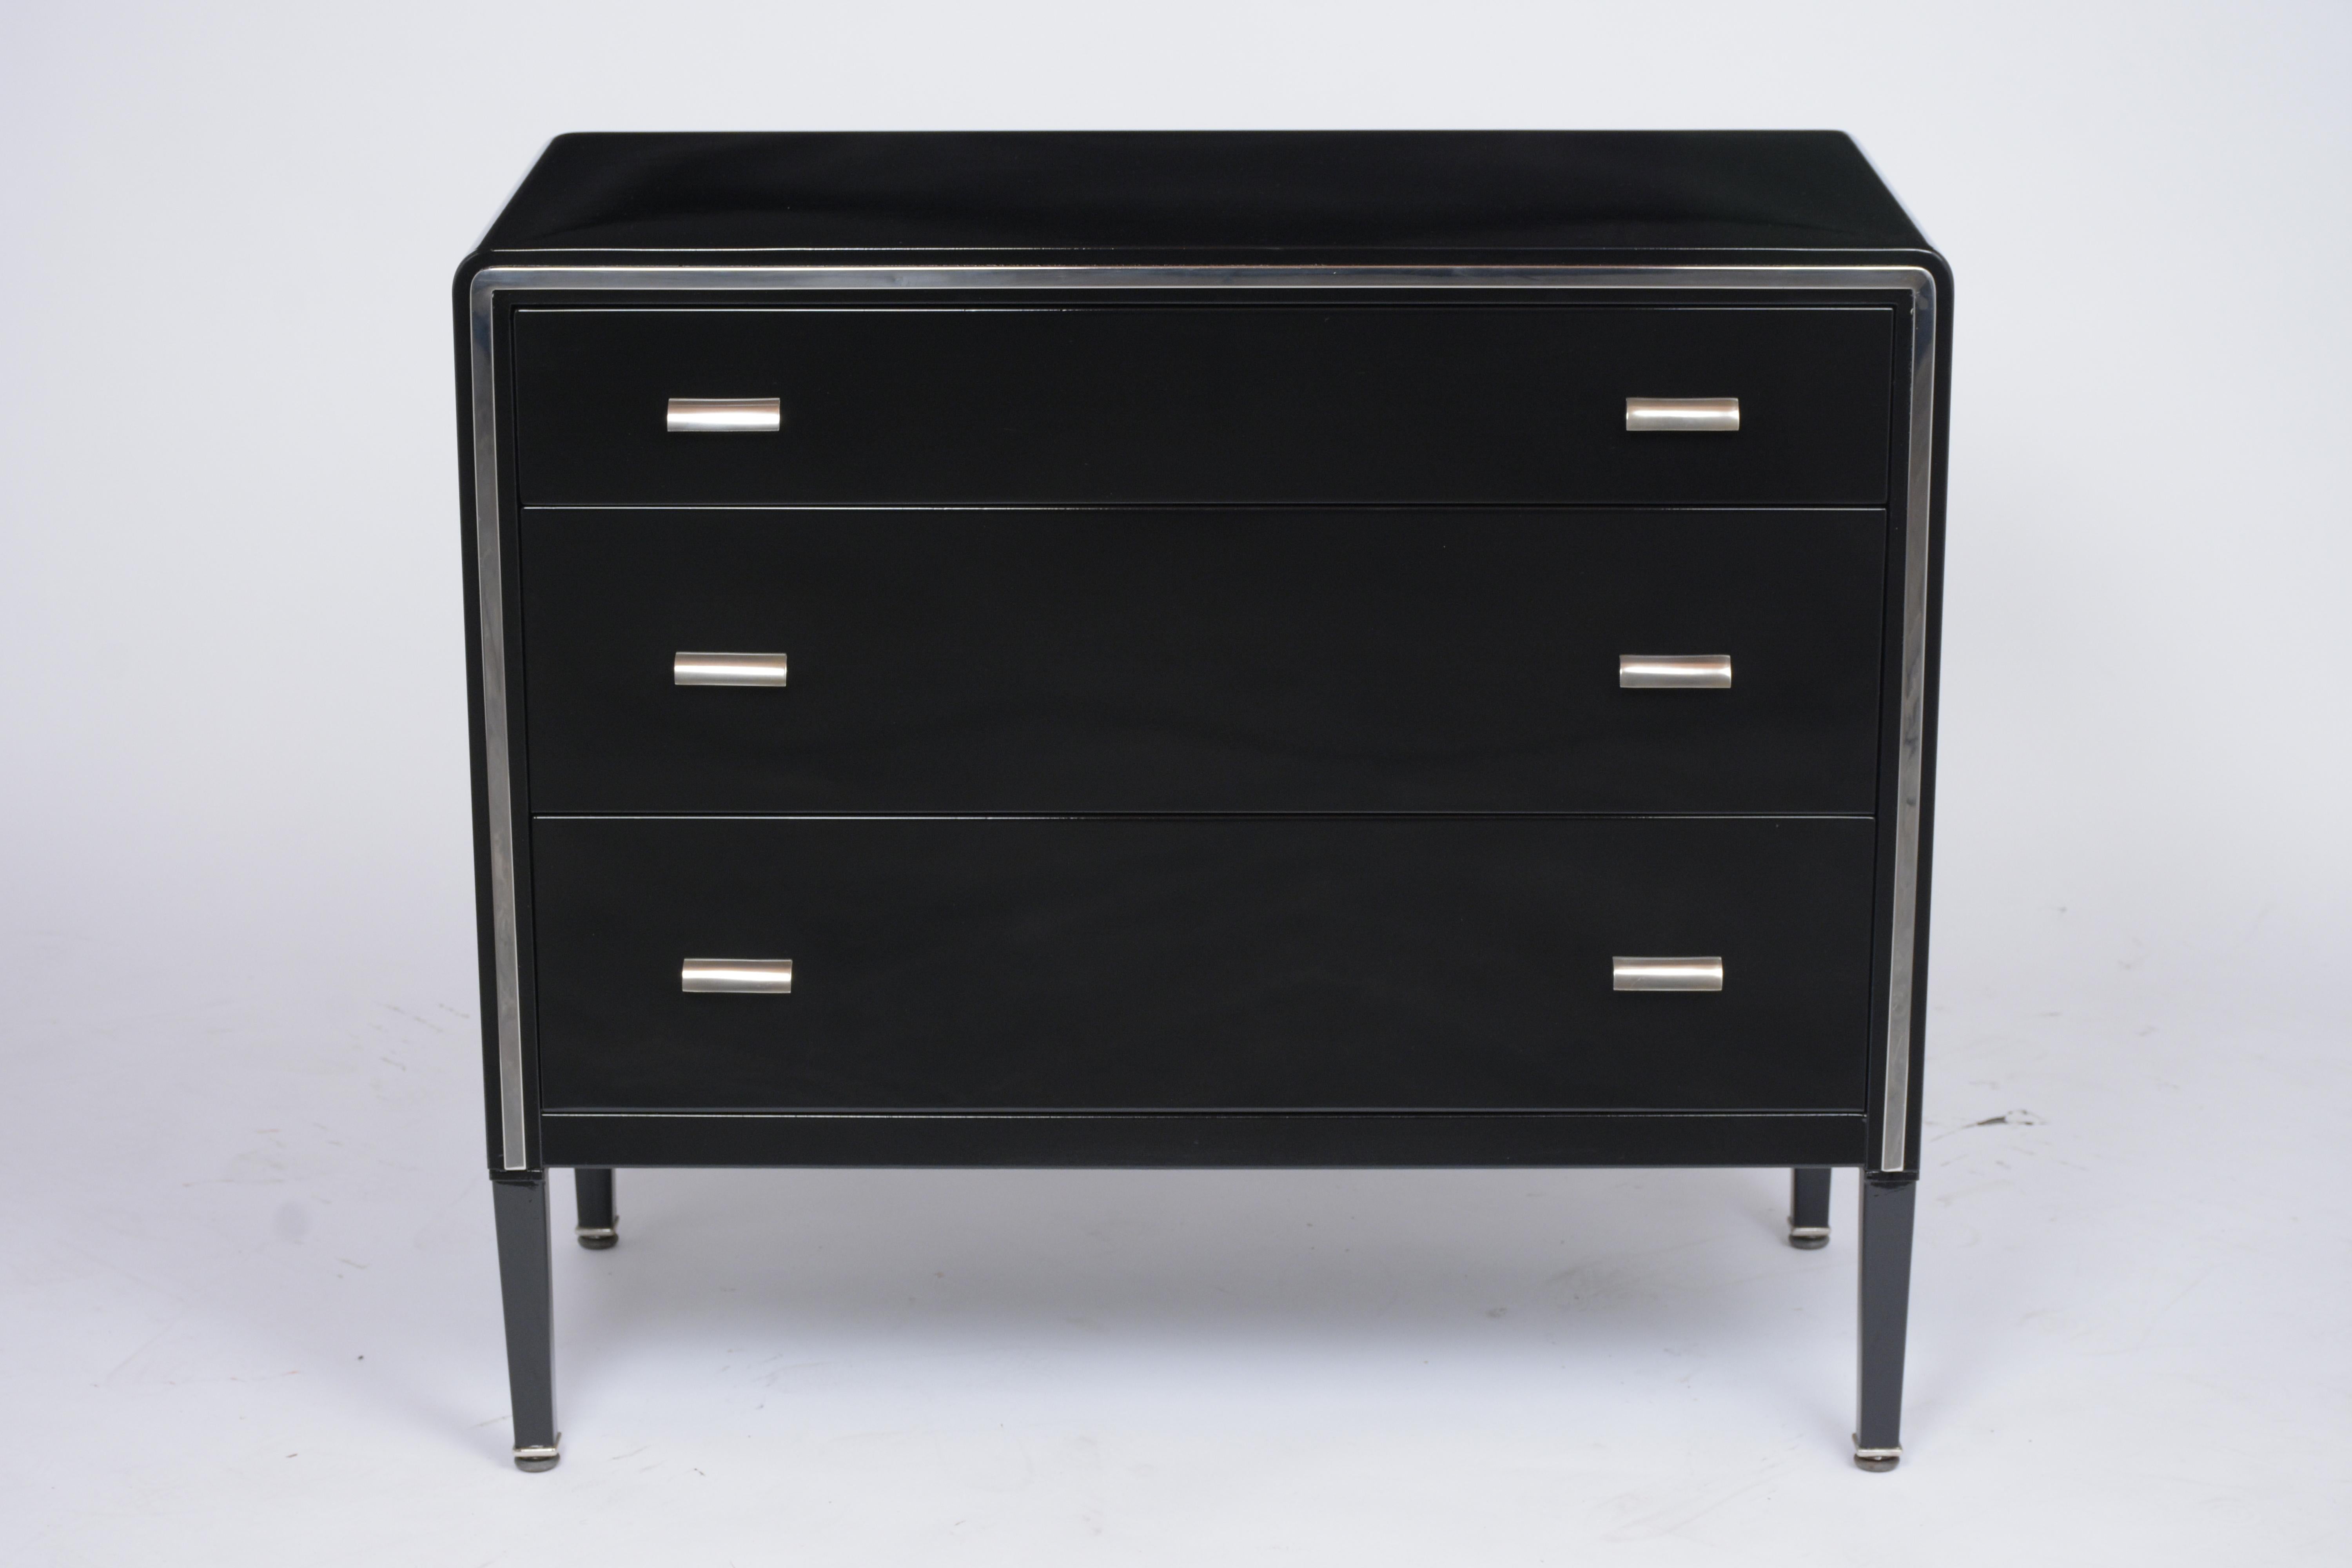 This modern chest of drawers by Simmons Company has been newly restored, made out metal, and is in good condition. This piece features a black color lacquered finish, flat chrome molding along the front, and three drawers with two chrome handles